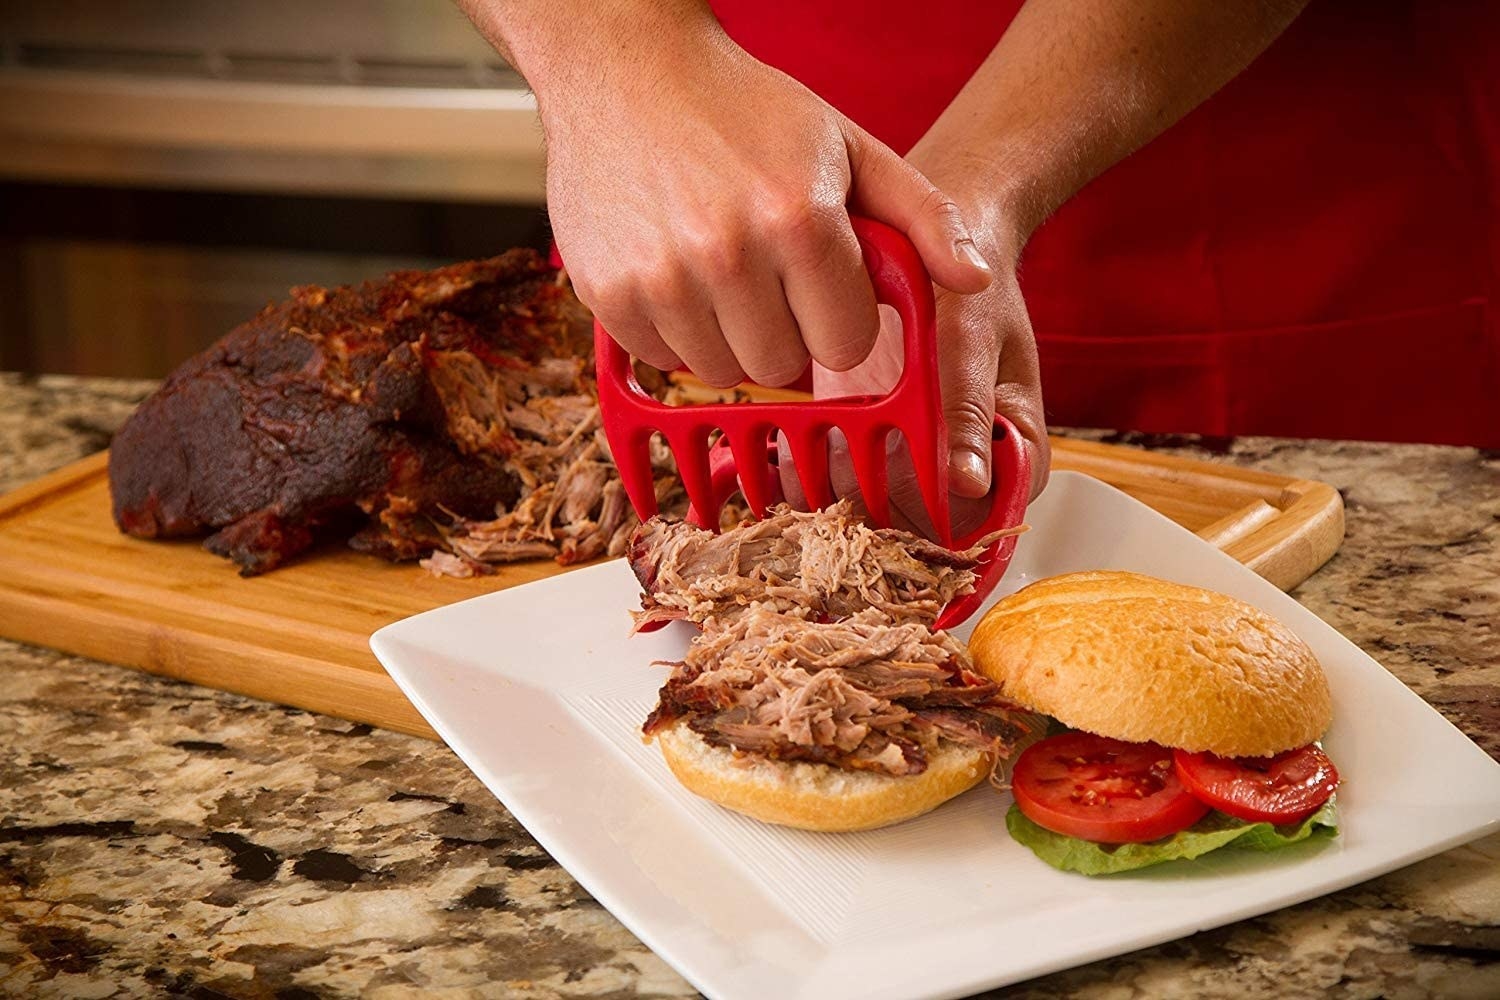 Hands use two red shredding claws to cut up pulled pork on a plate